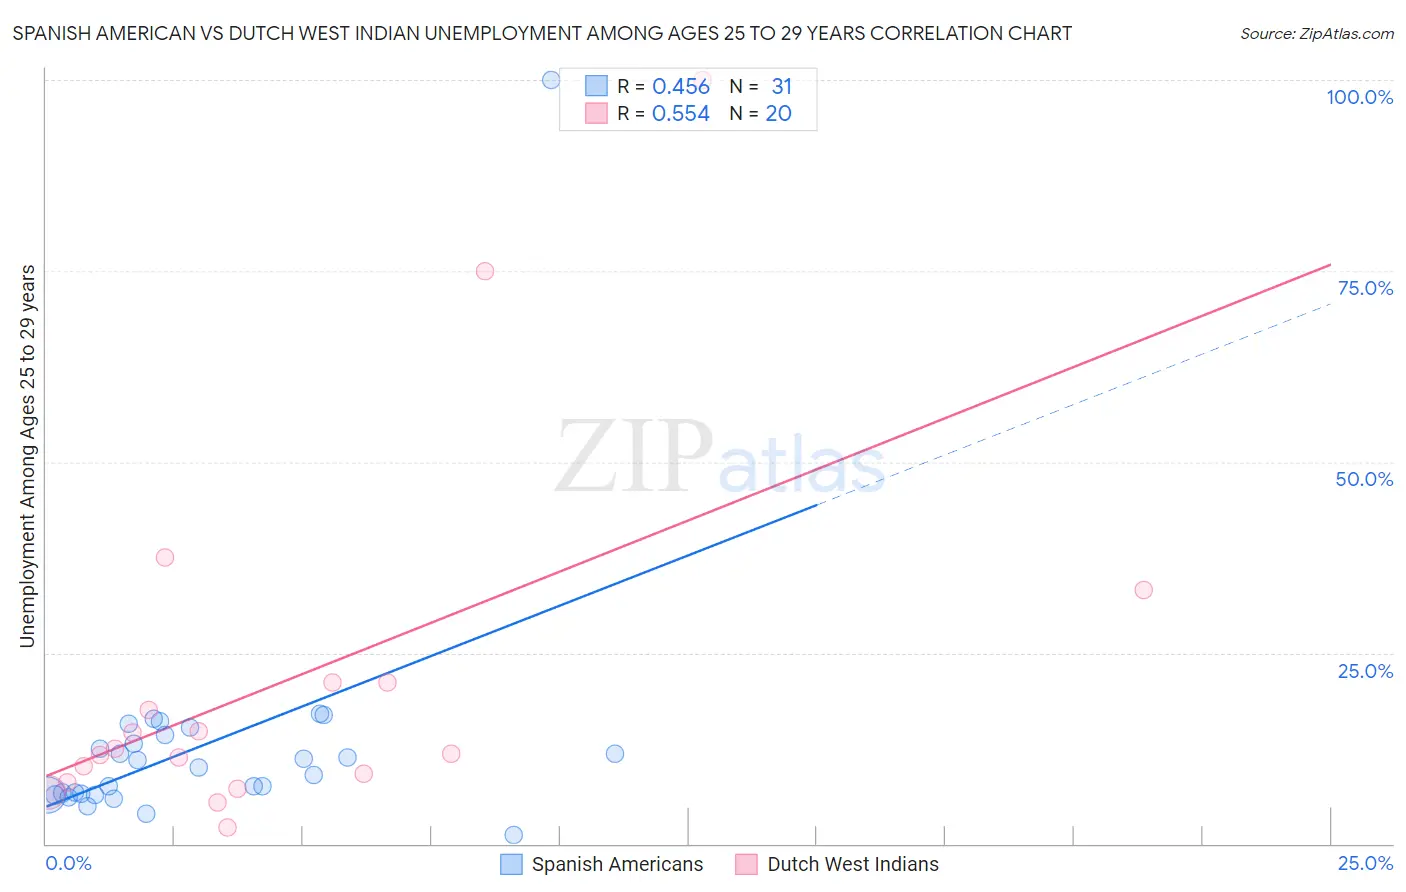 Spanish American vs Dutch West Indian Unemployment Among Ages 25 to 29 years